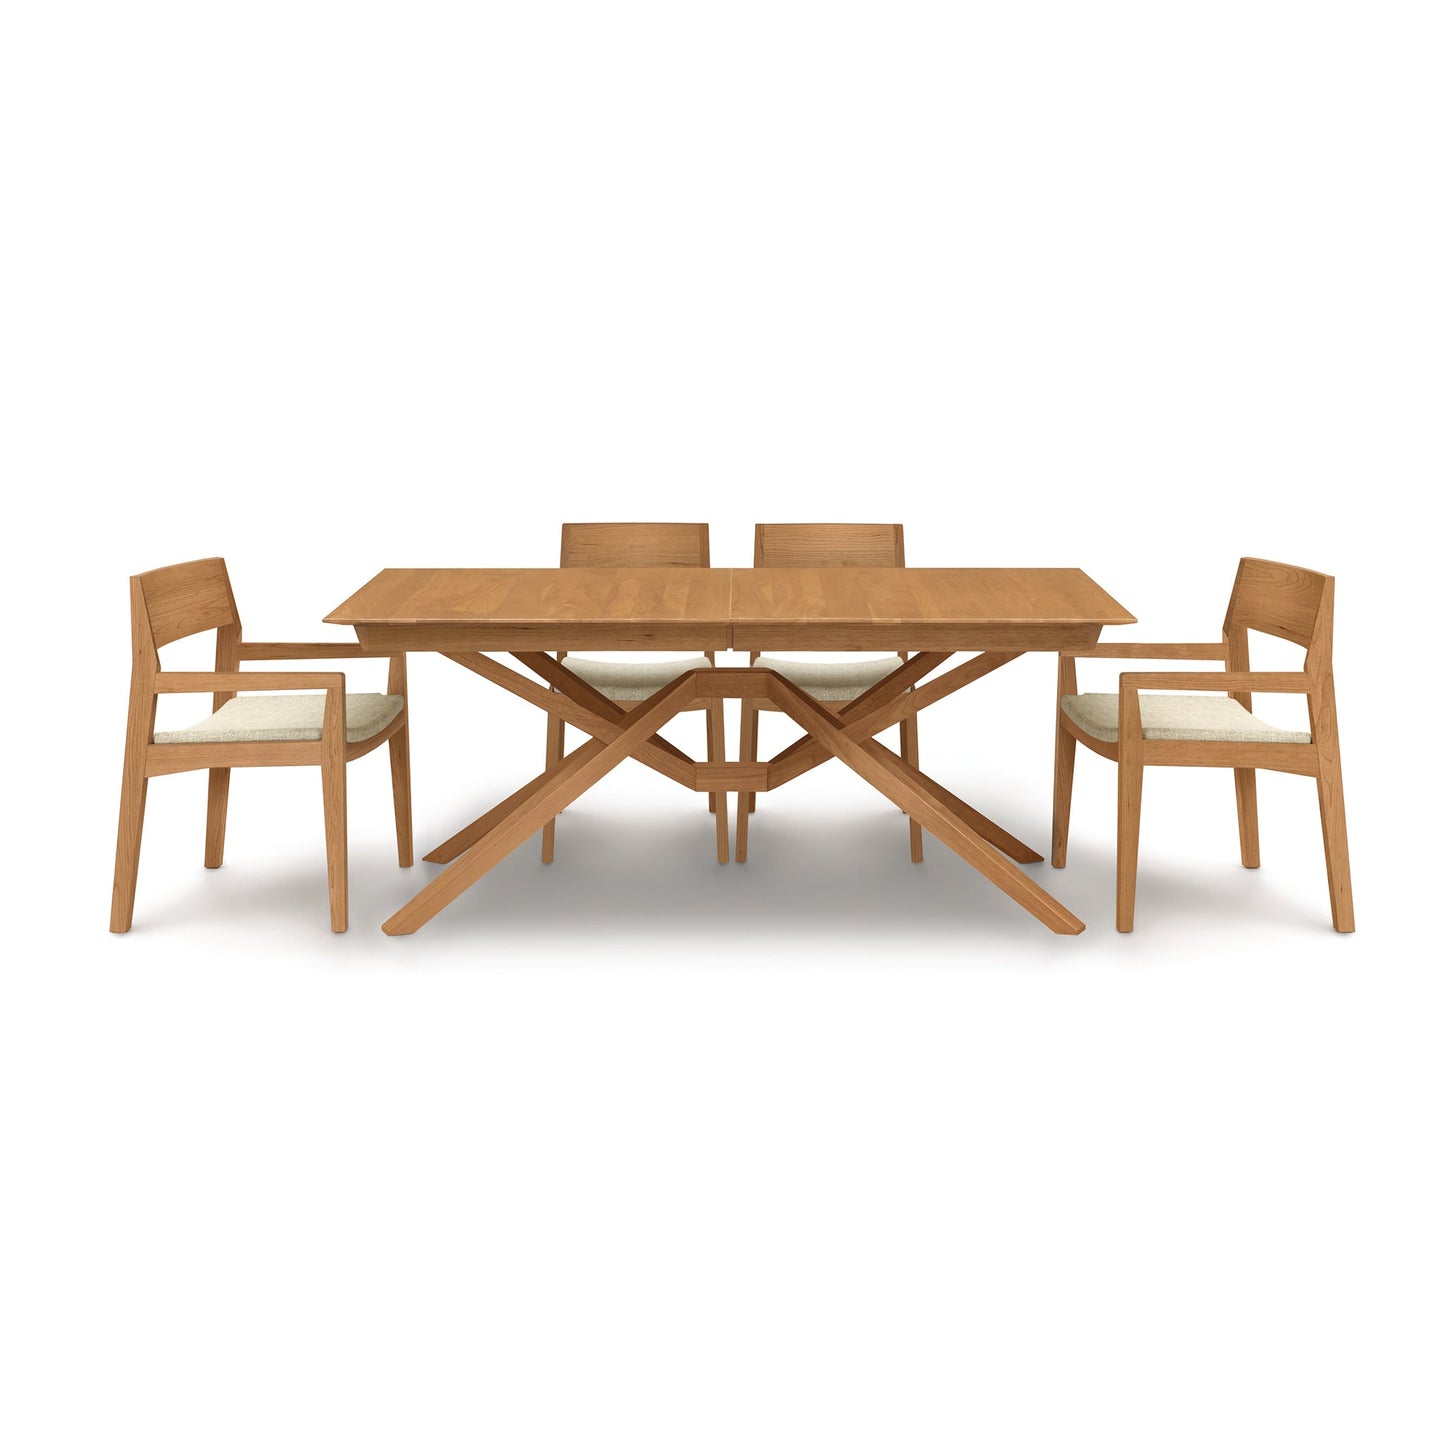 A dining table with four chairs on a white background.